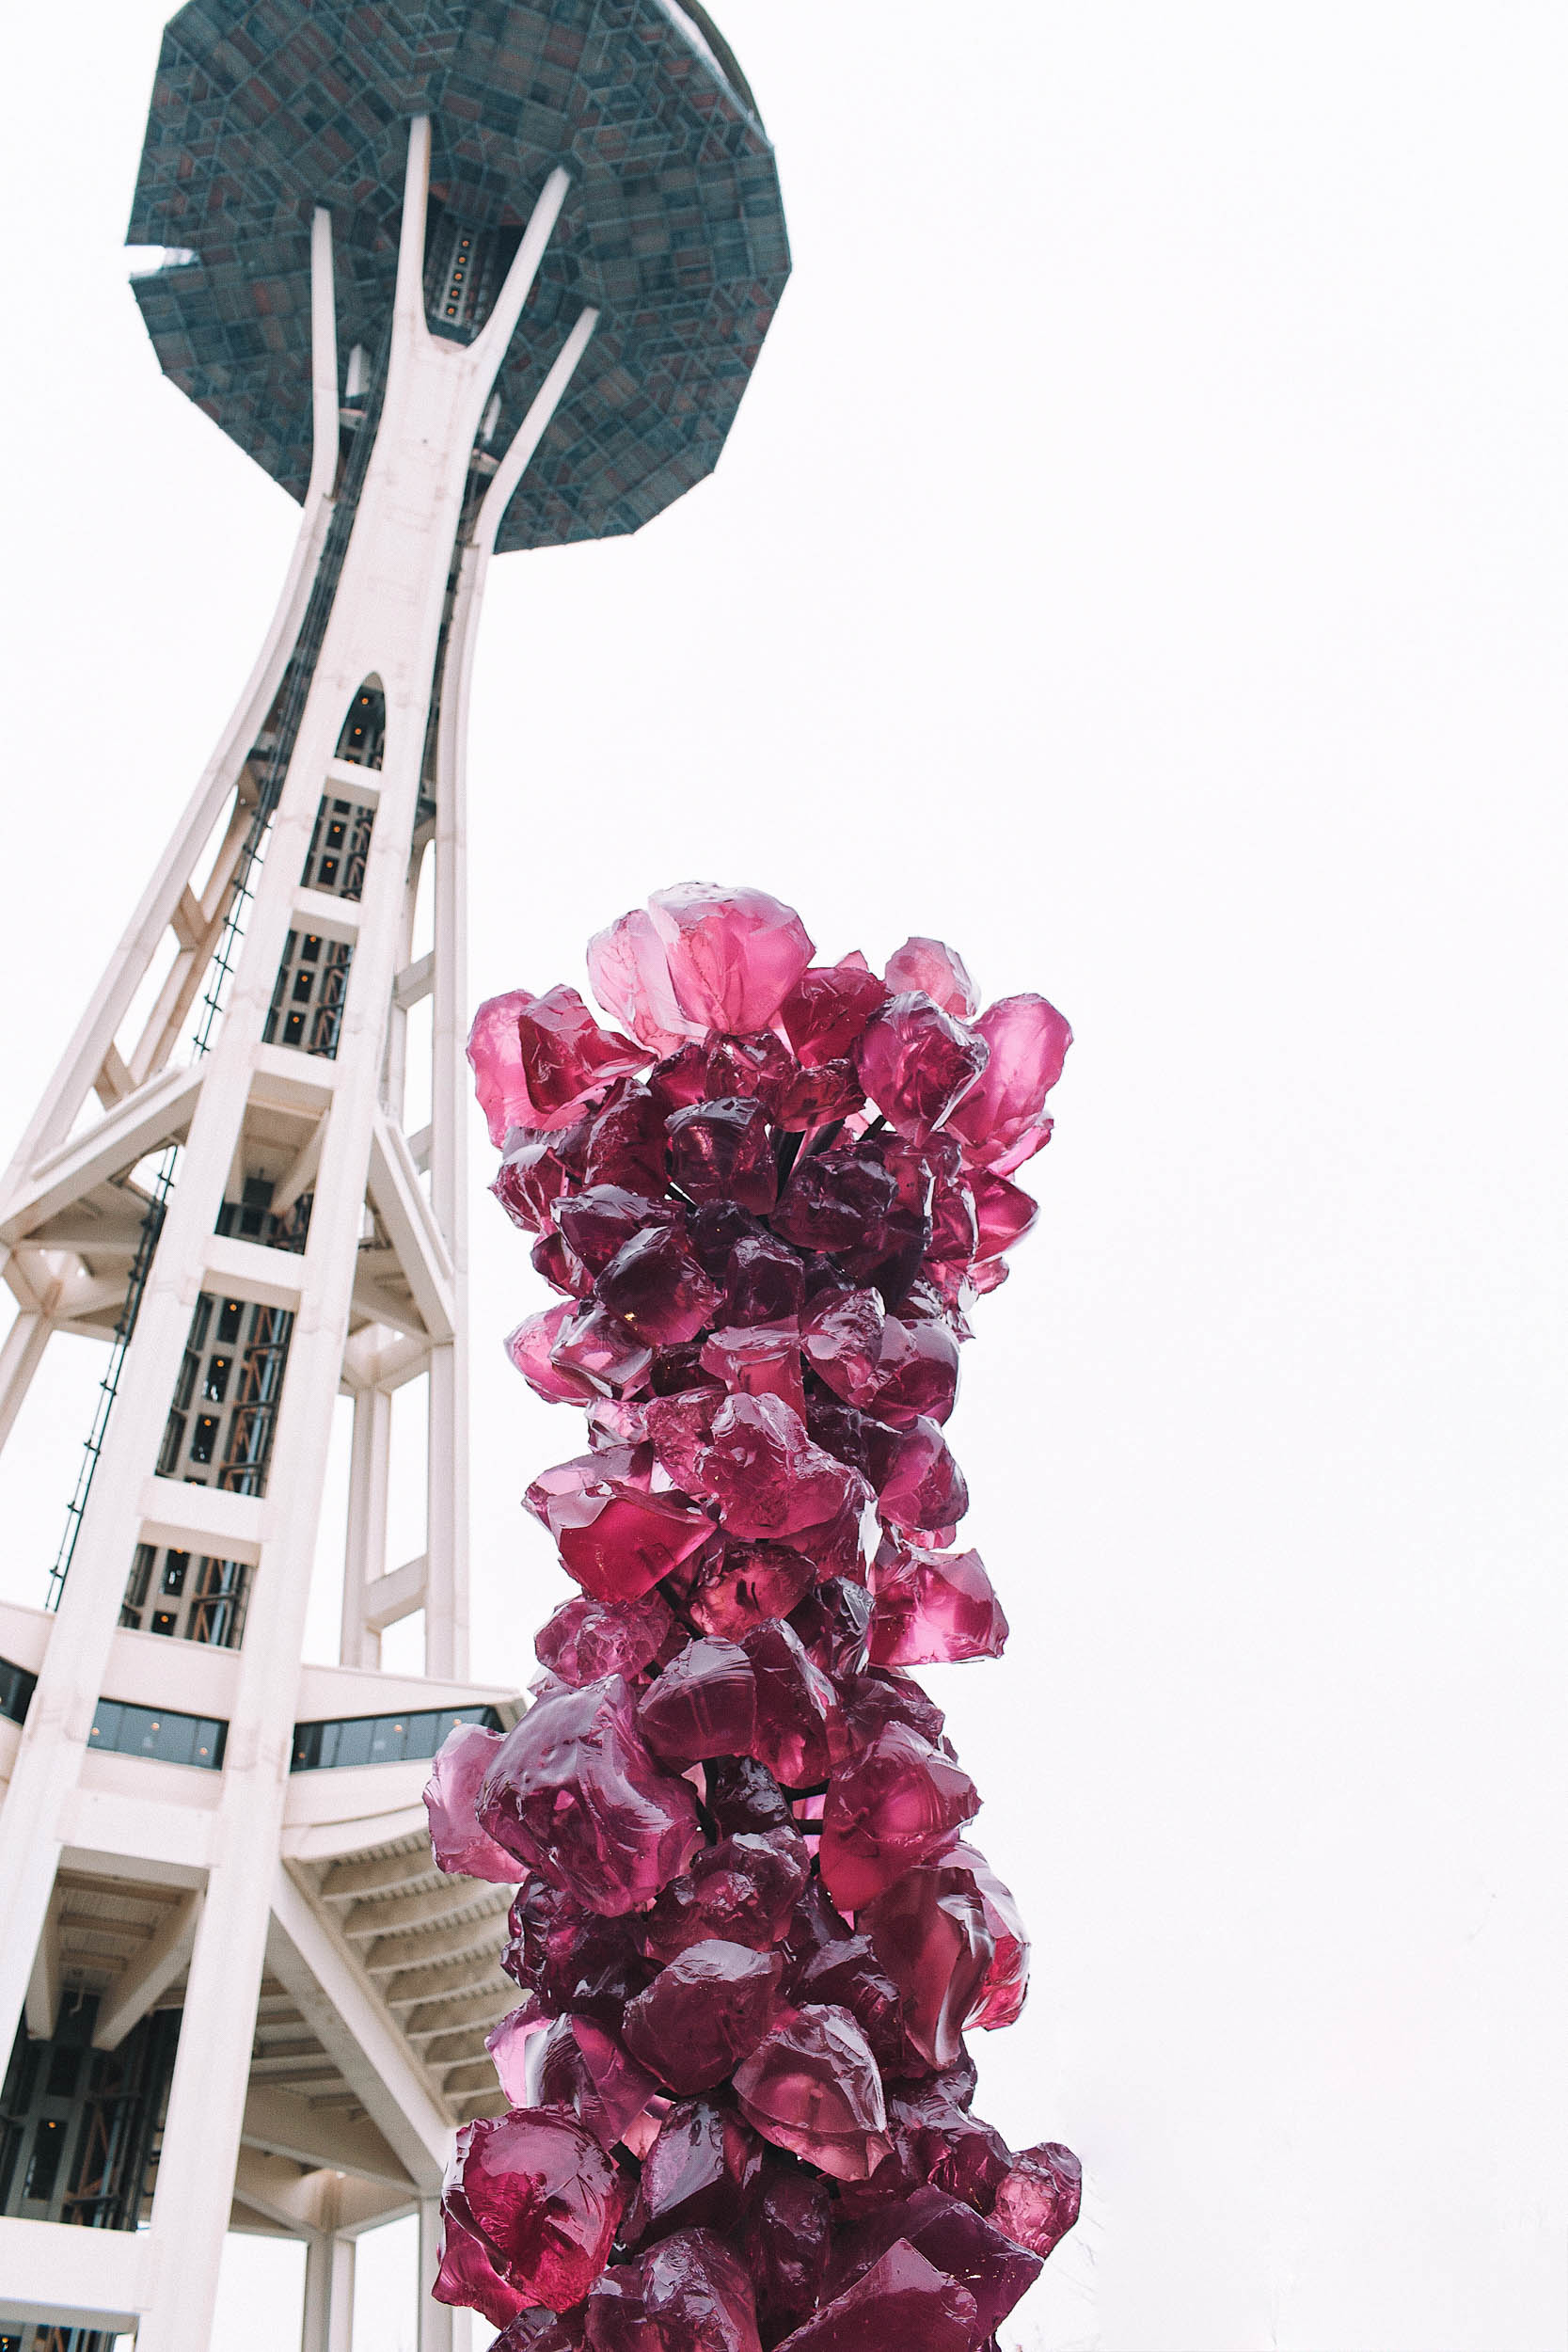 Chihuly Garden and Glass in Seattle is an absolute can't miss!